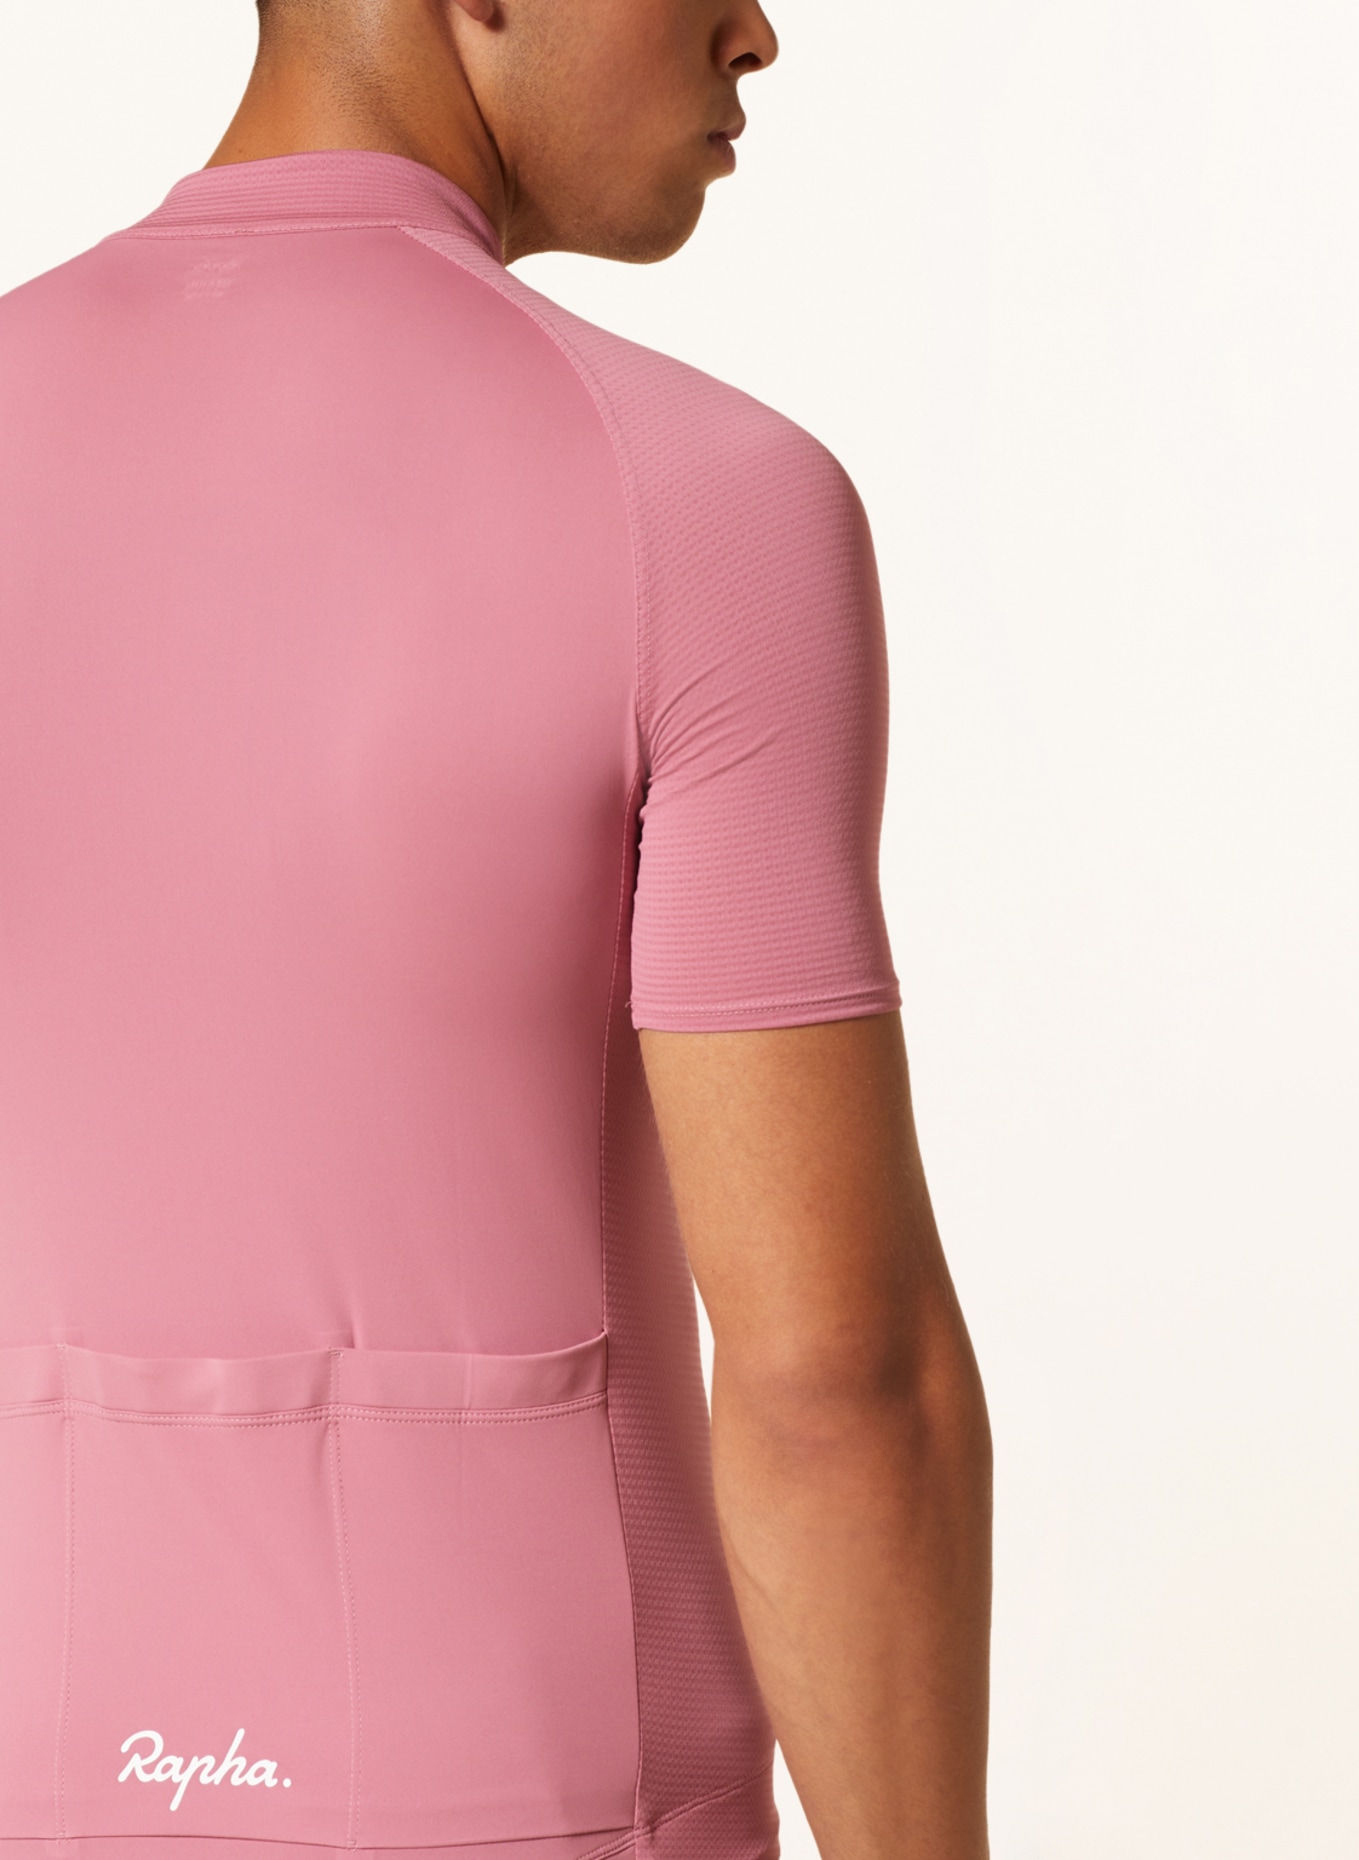 Rapha Cycling jersey CORE LIGHTWEIGHT JERSEY in dusky pink/ white